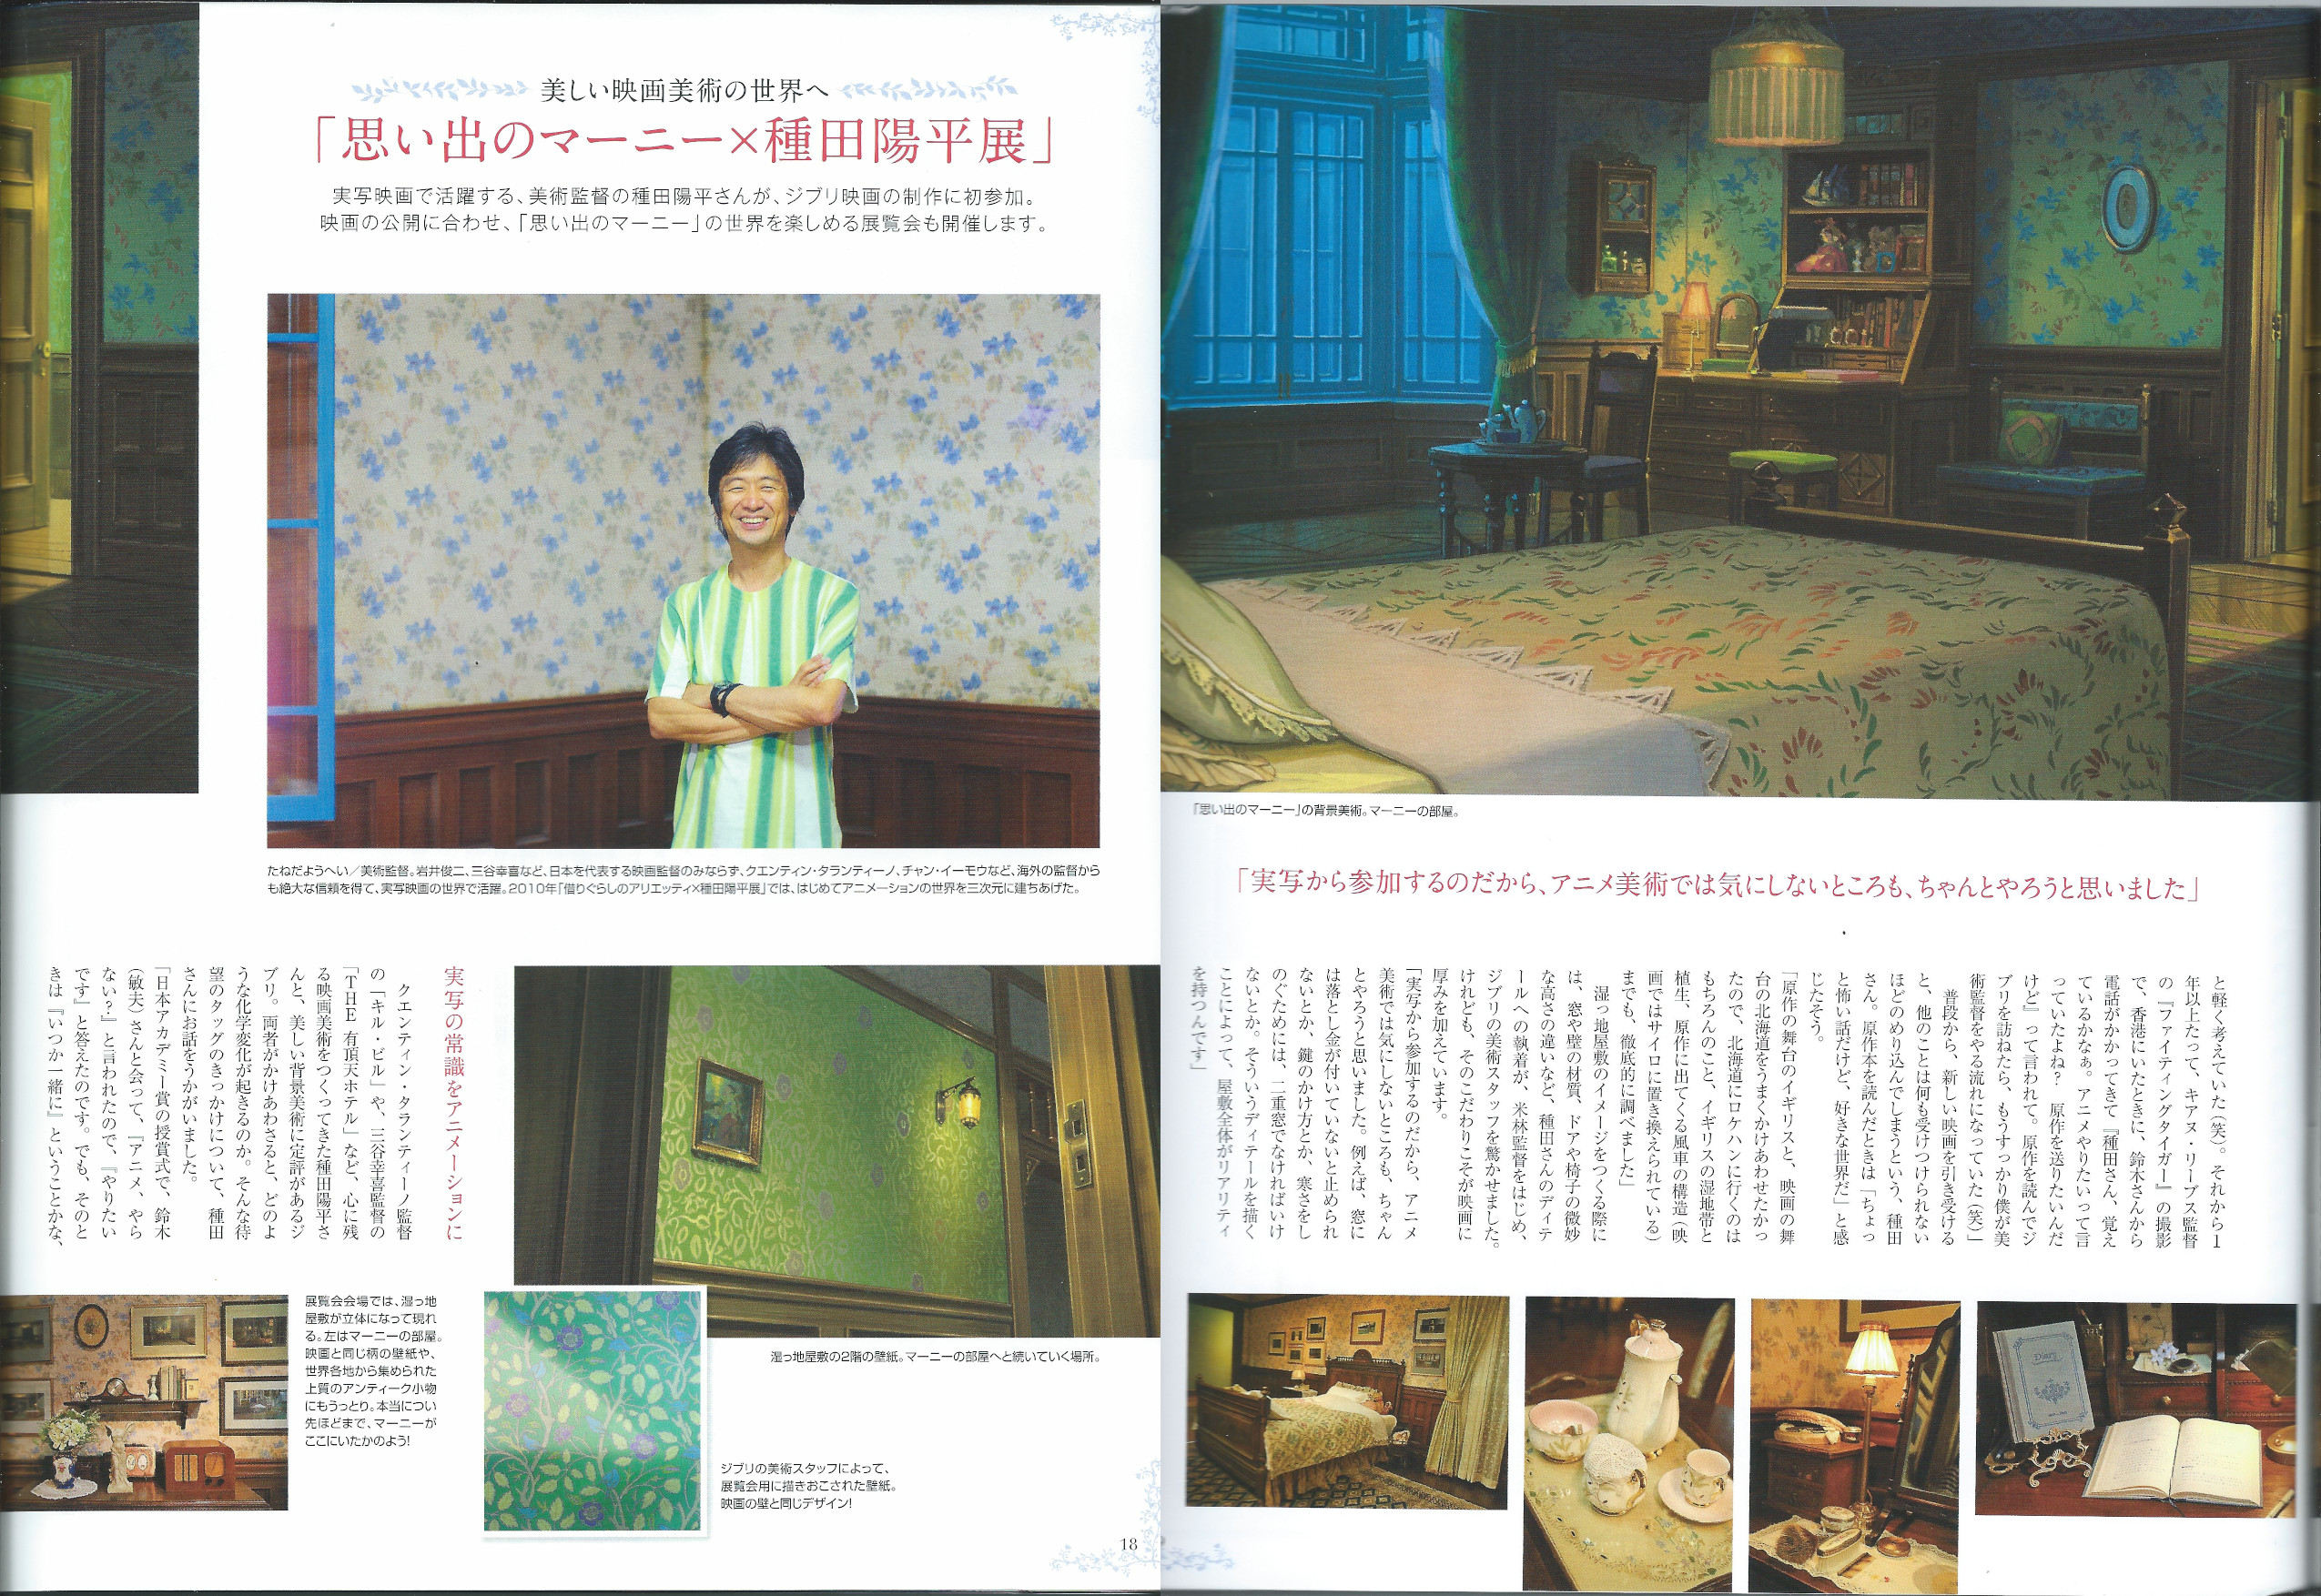 Pages 18 and 19 of the magazine